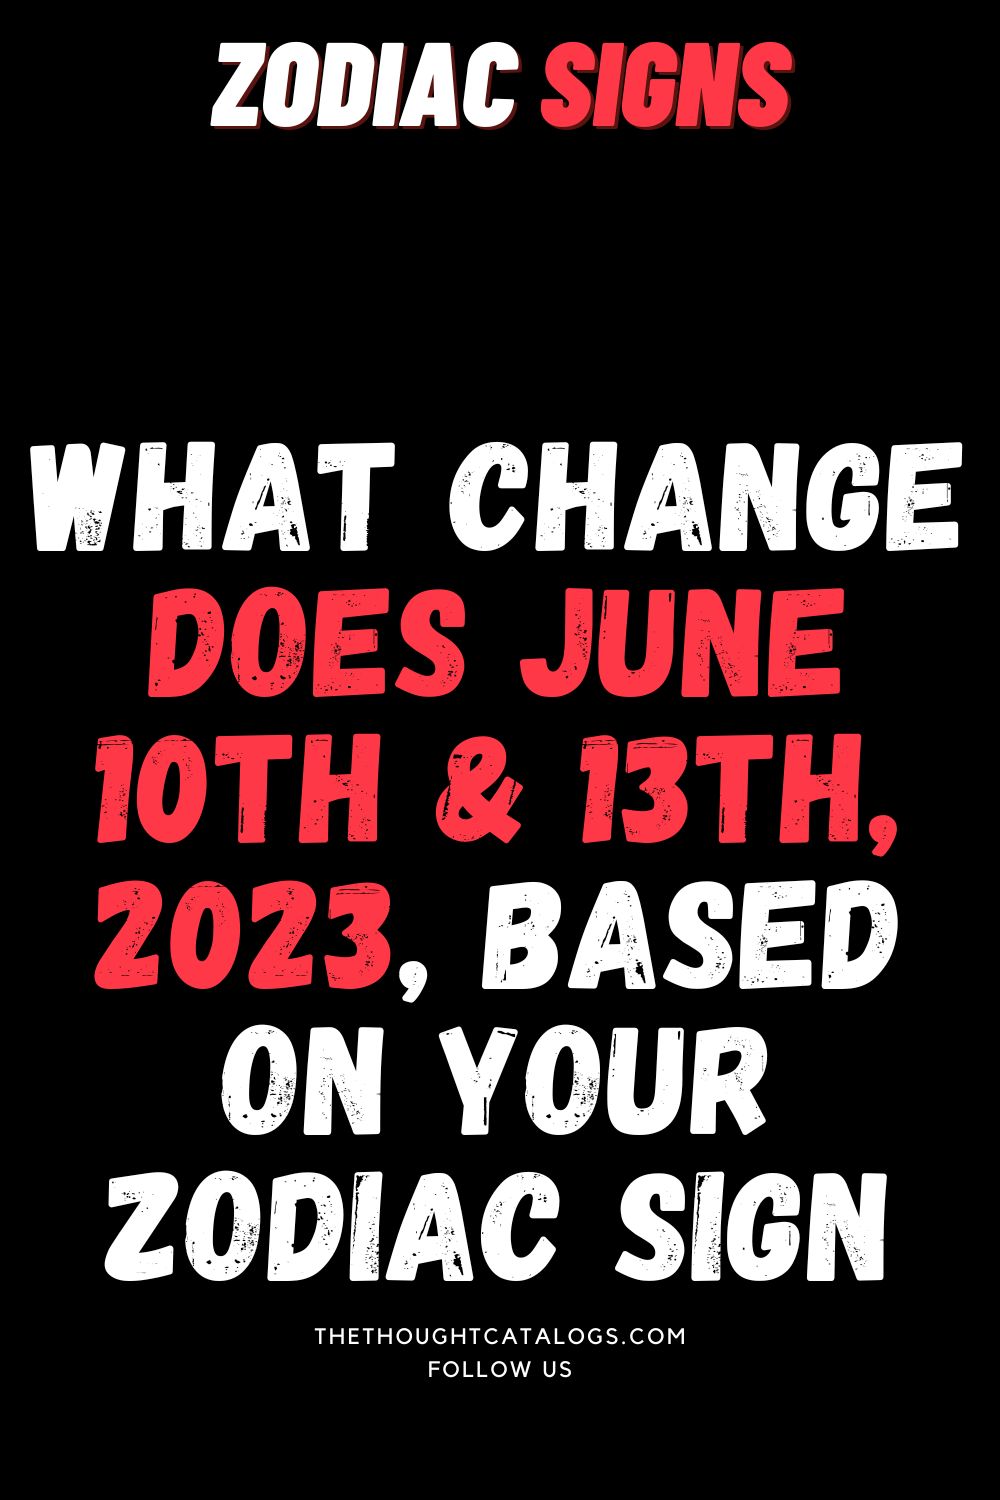 What Change Does June 10th & 13th, 2023